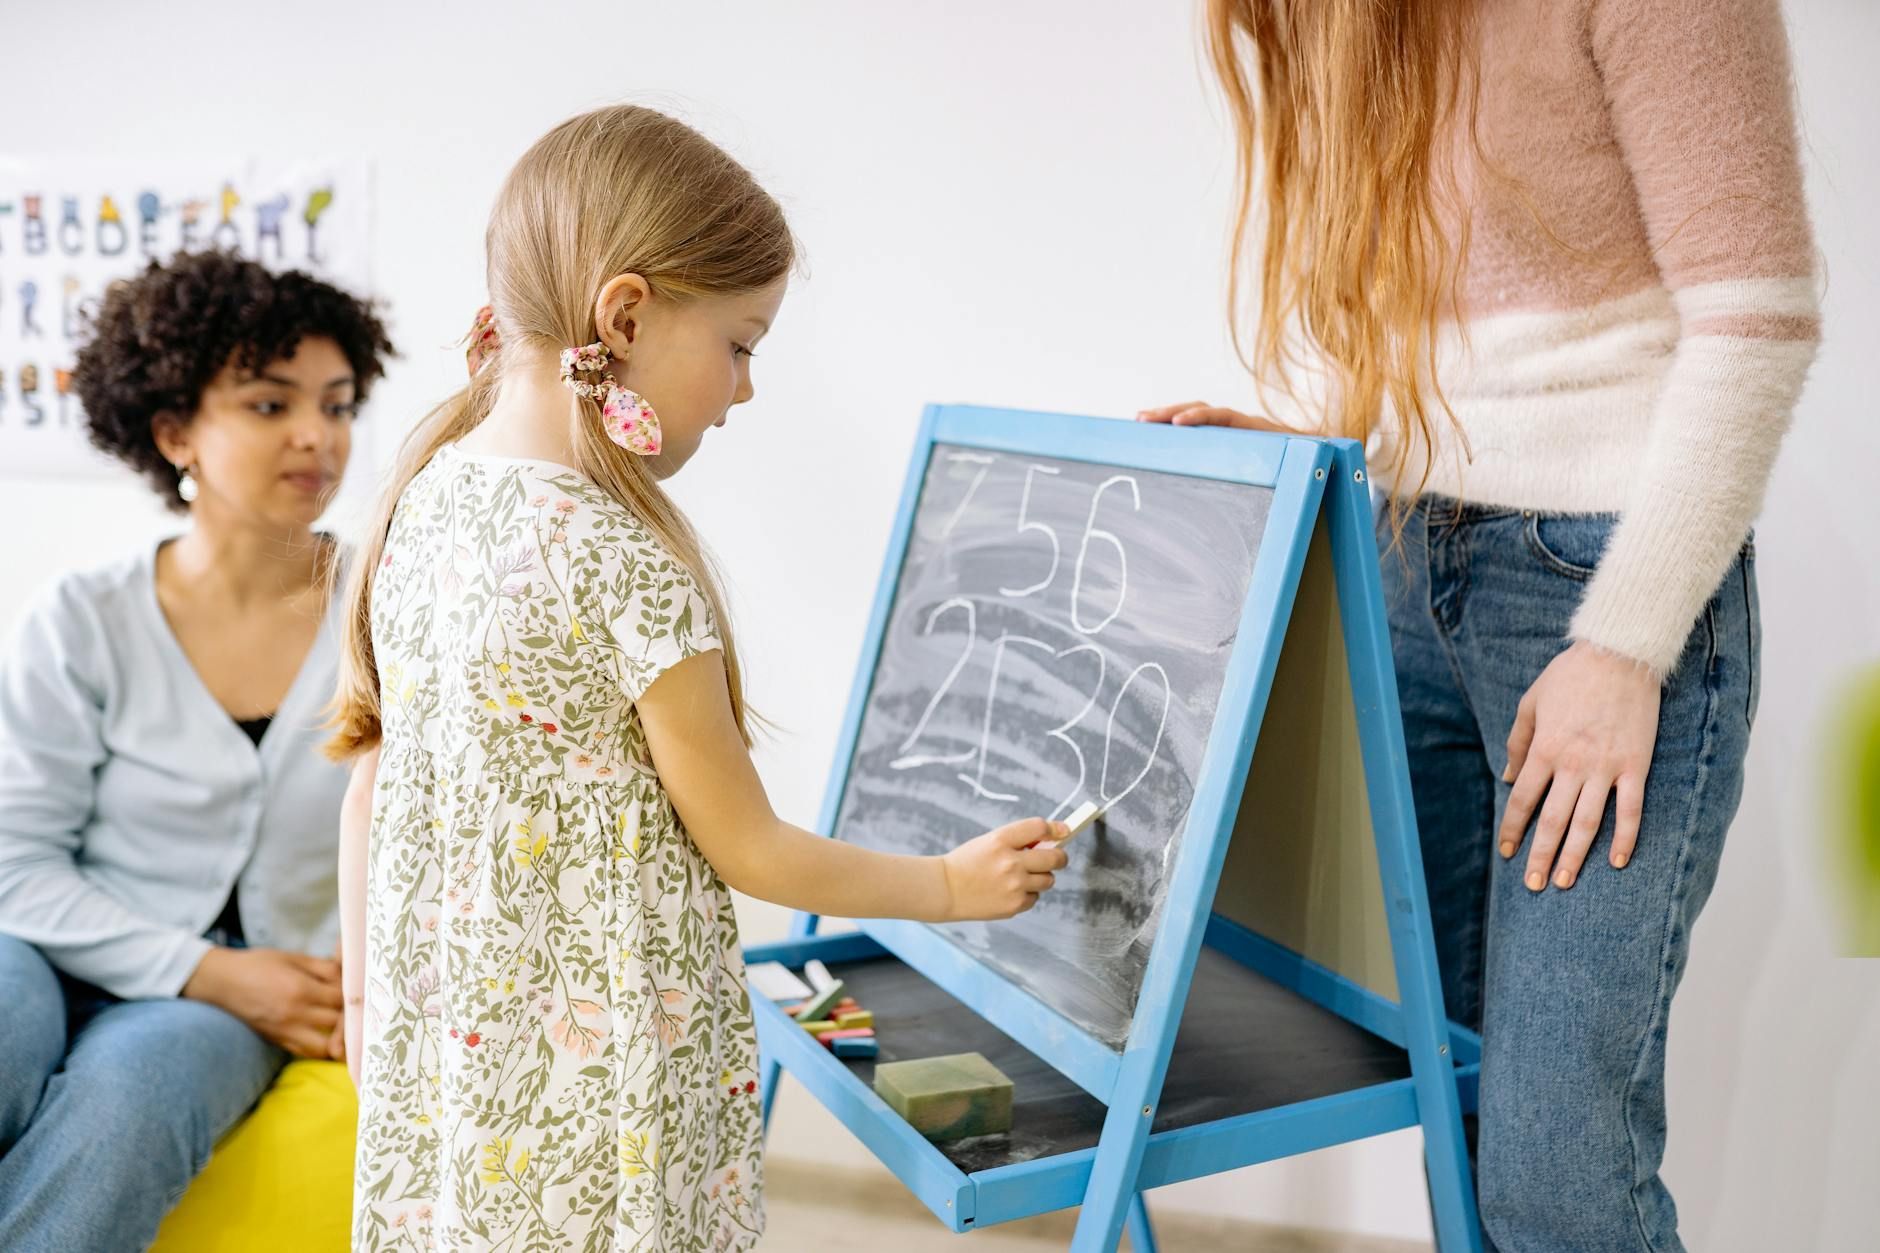 A little girl drawing on a chalkboard while a woman watches